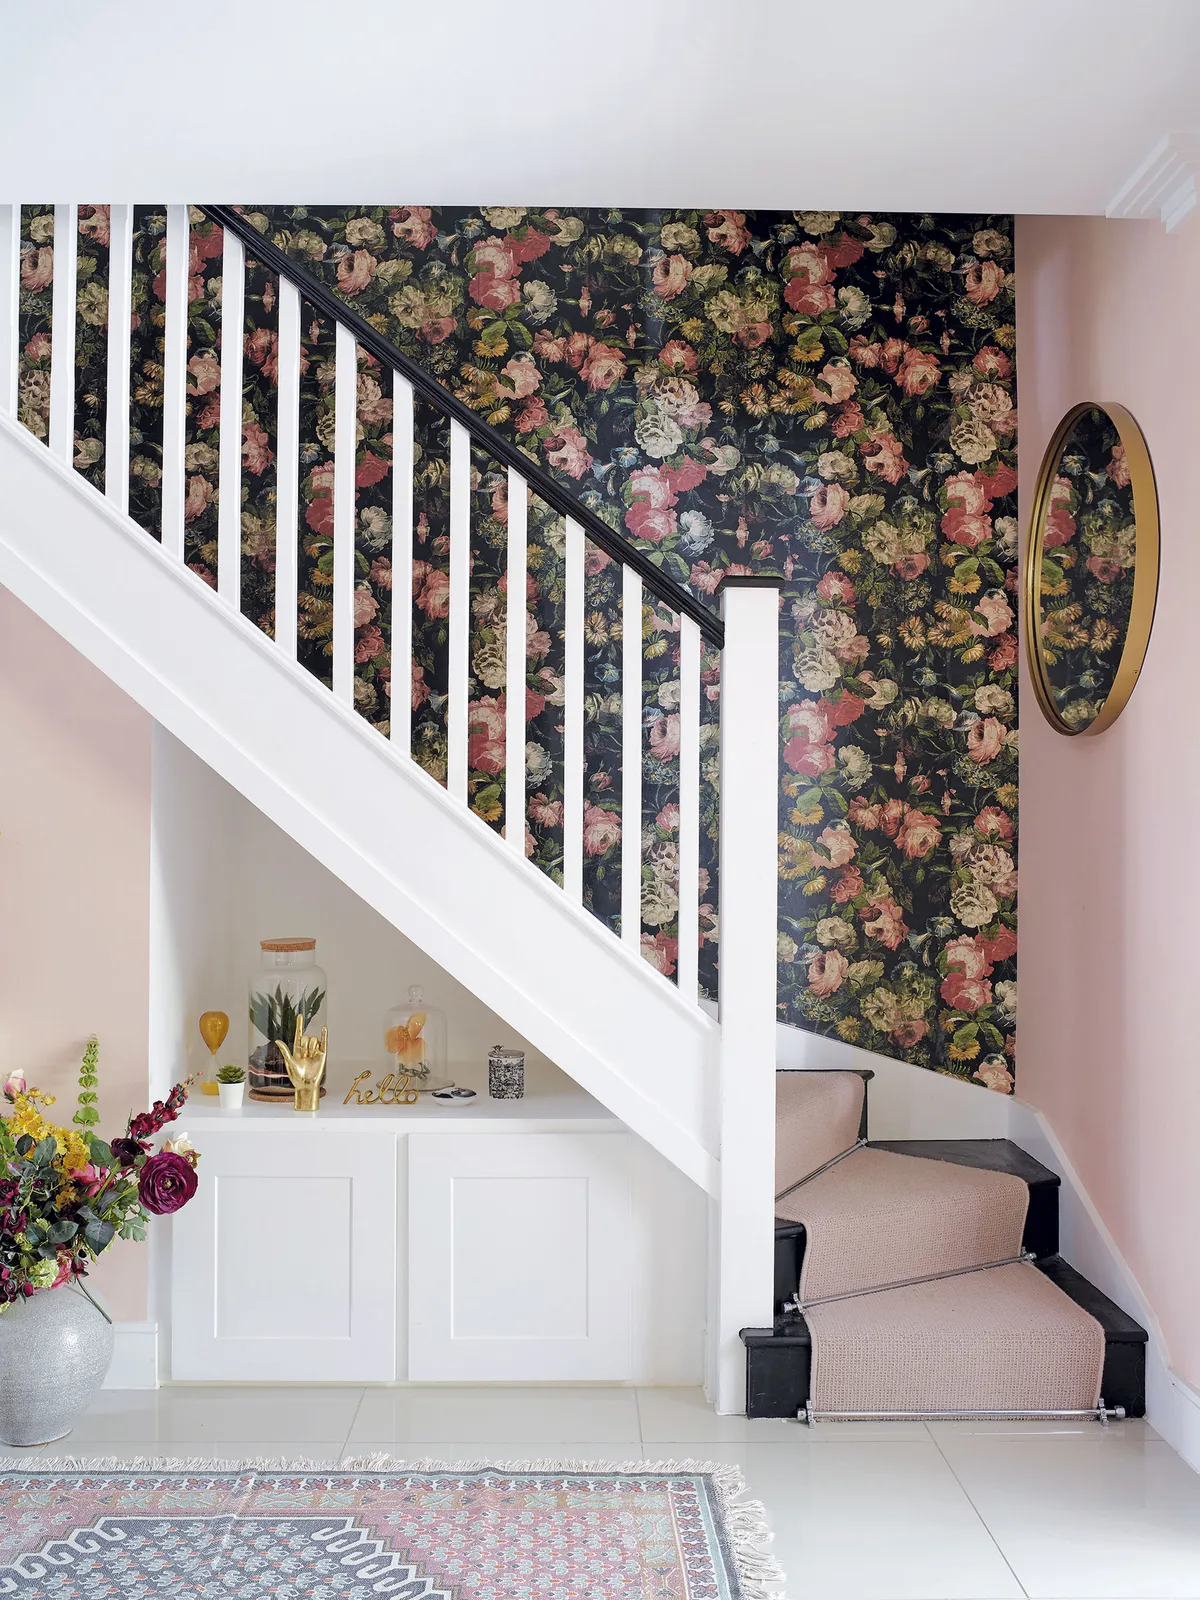 ‘I adore modern vintage homeware and rugs and love to give a sense of old to the rooms in my house,’ says Sam. The aged-effect wallpaper adds just the right amount of antique chic